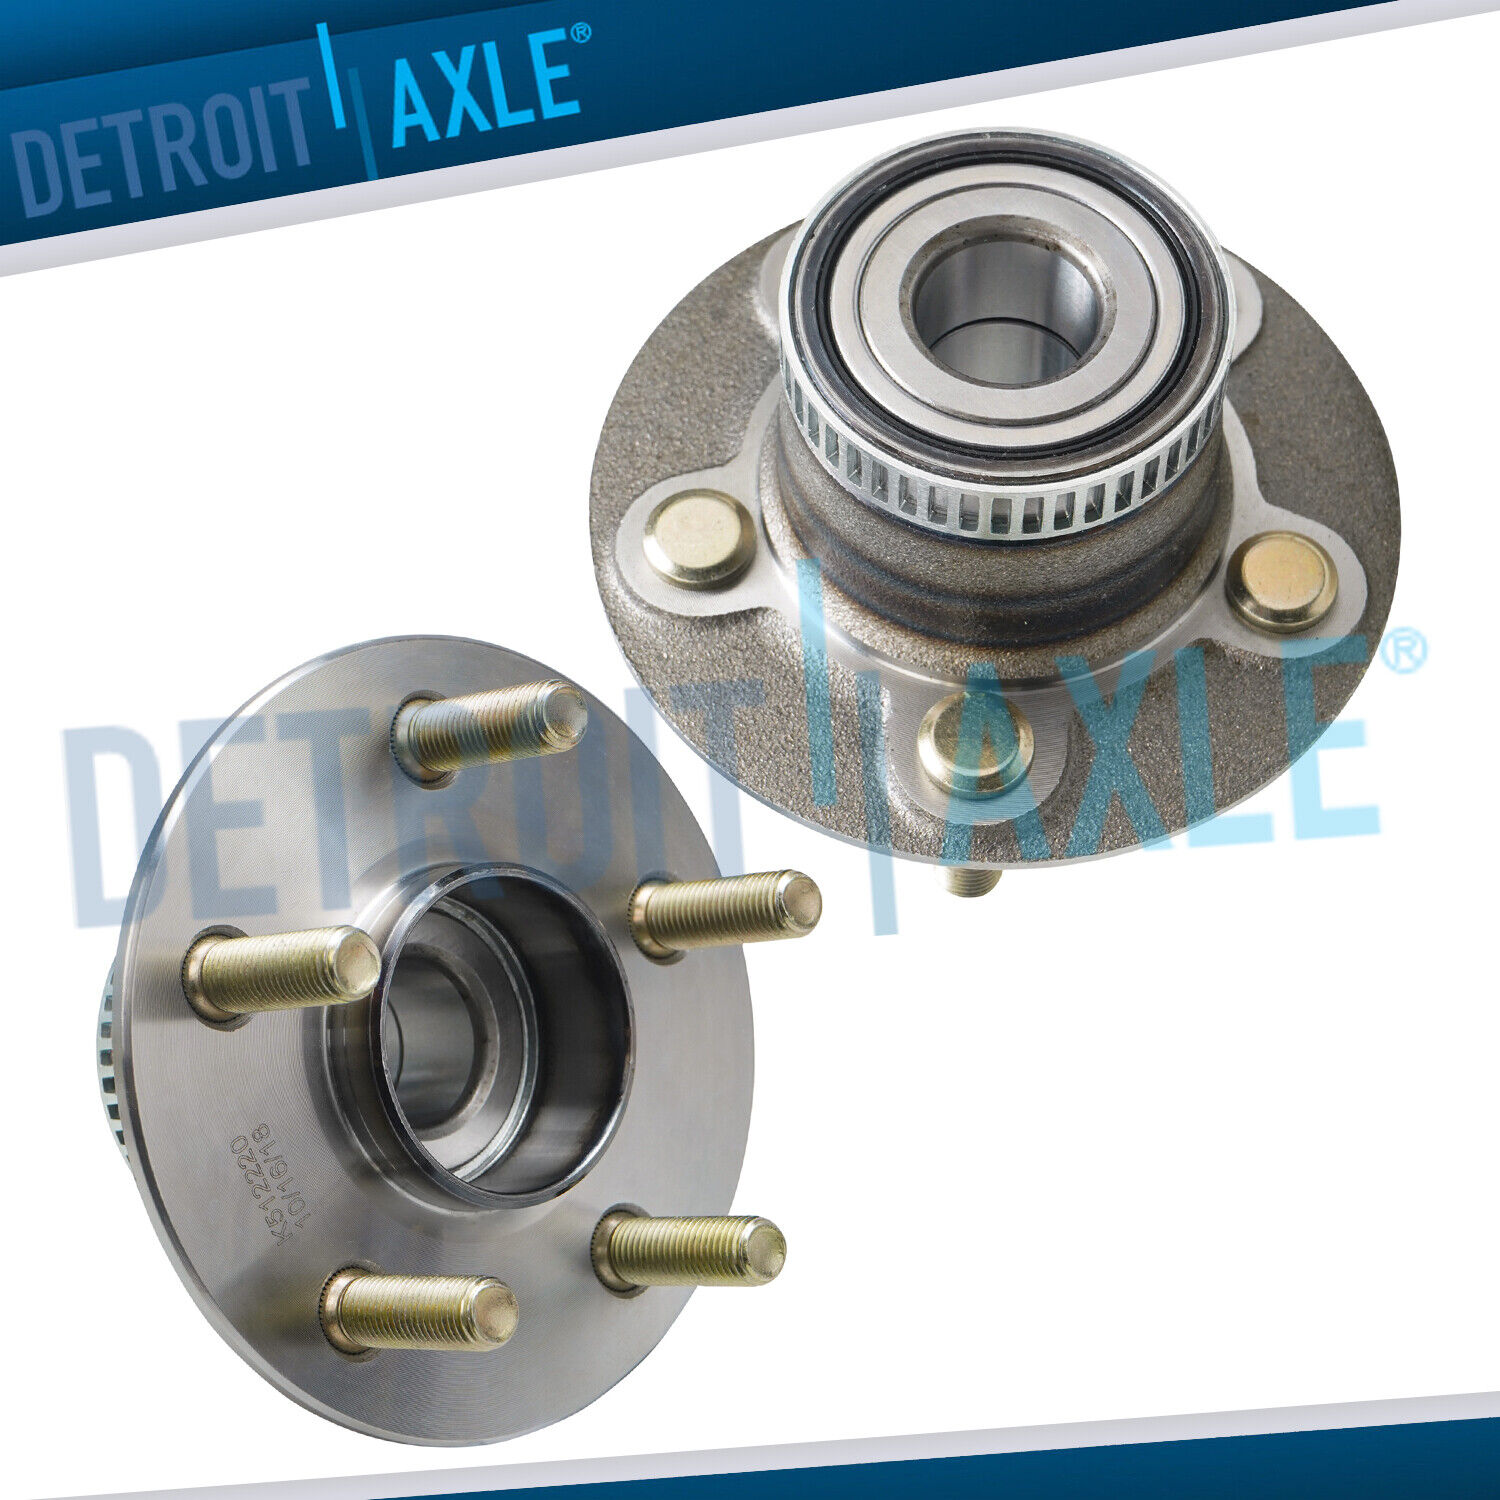 Rear Wheel Bearing and Hubs for Chrysler Sebring Plymouth Breeze Dodge Stratus